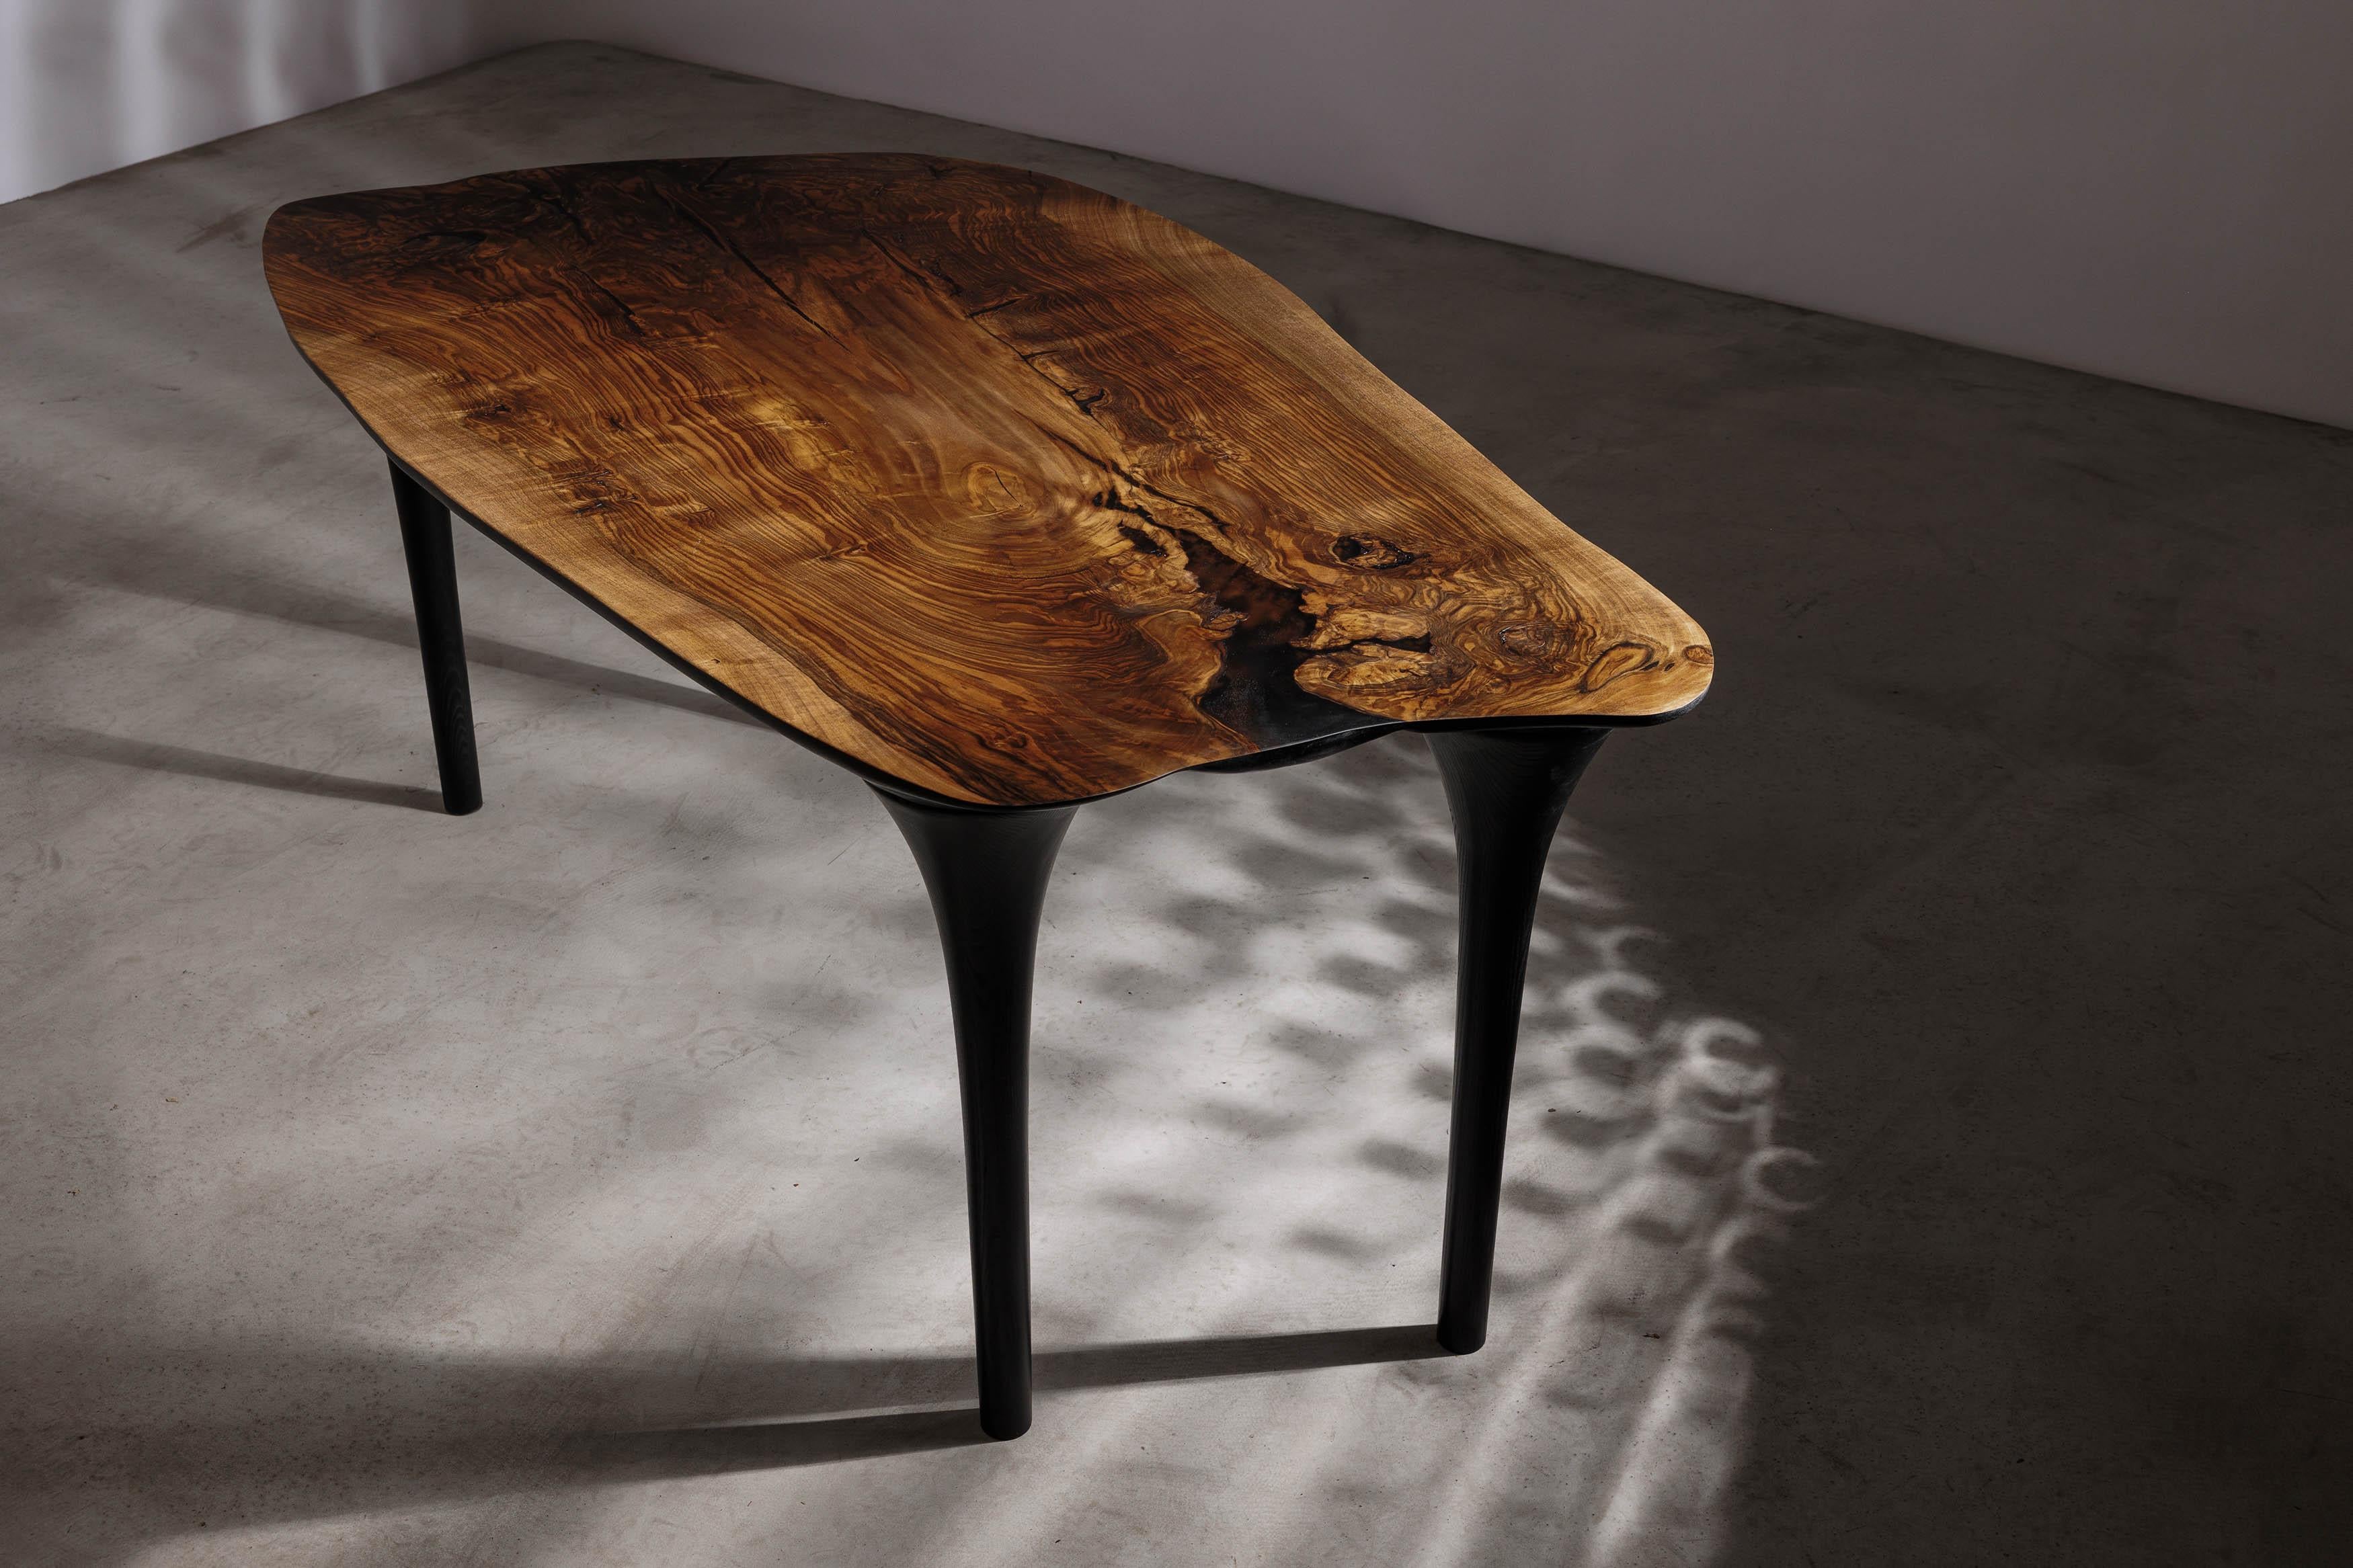 EM212 dining table by Eero Moss
One of a kind
Dimensions; W 175 x D 98 x H 78 cm
Materials: Walnut, ash, India ink.
Finish: Natural oils.

Erosio Collection

This collection is an ode to the fluid, organic shapes found in the natural world.